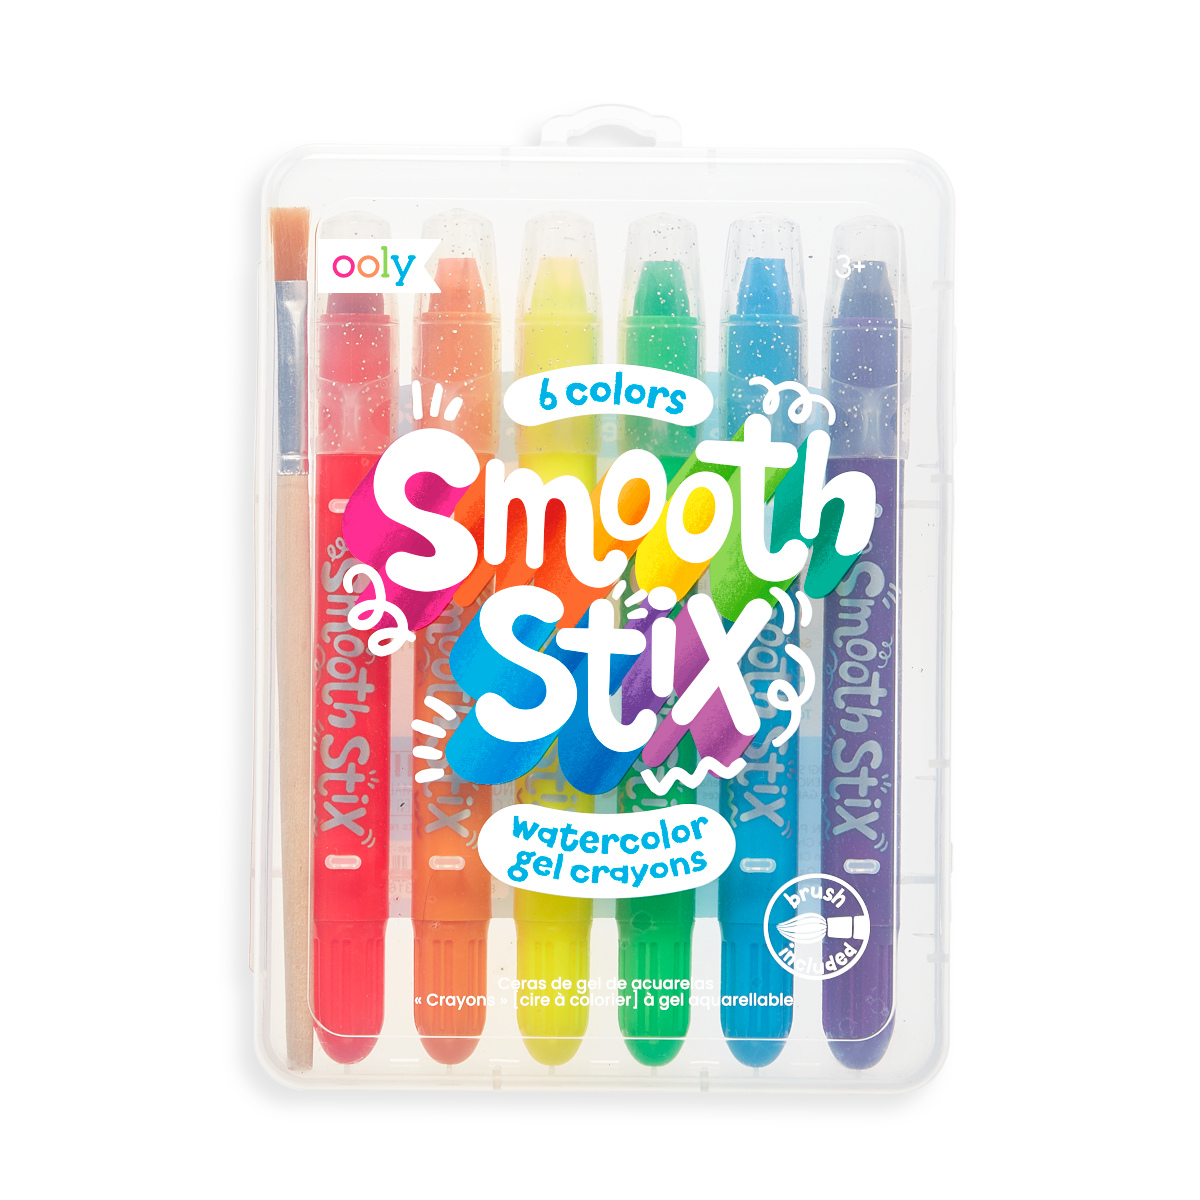 OOLY Smooth Stix Watercolor Gel Crayons - Set of 6 in package (front).